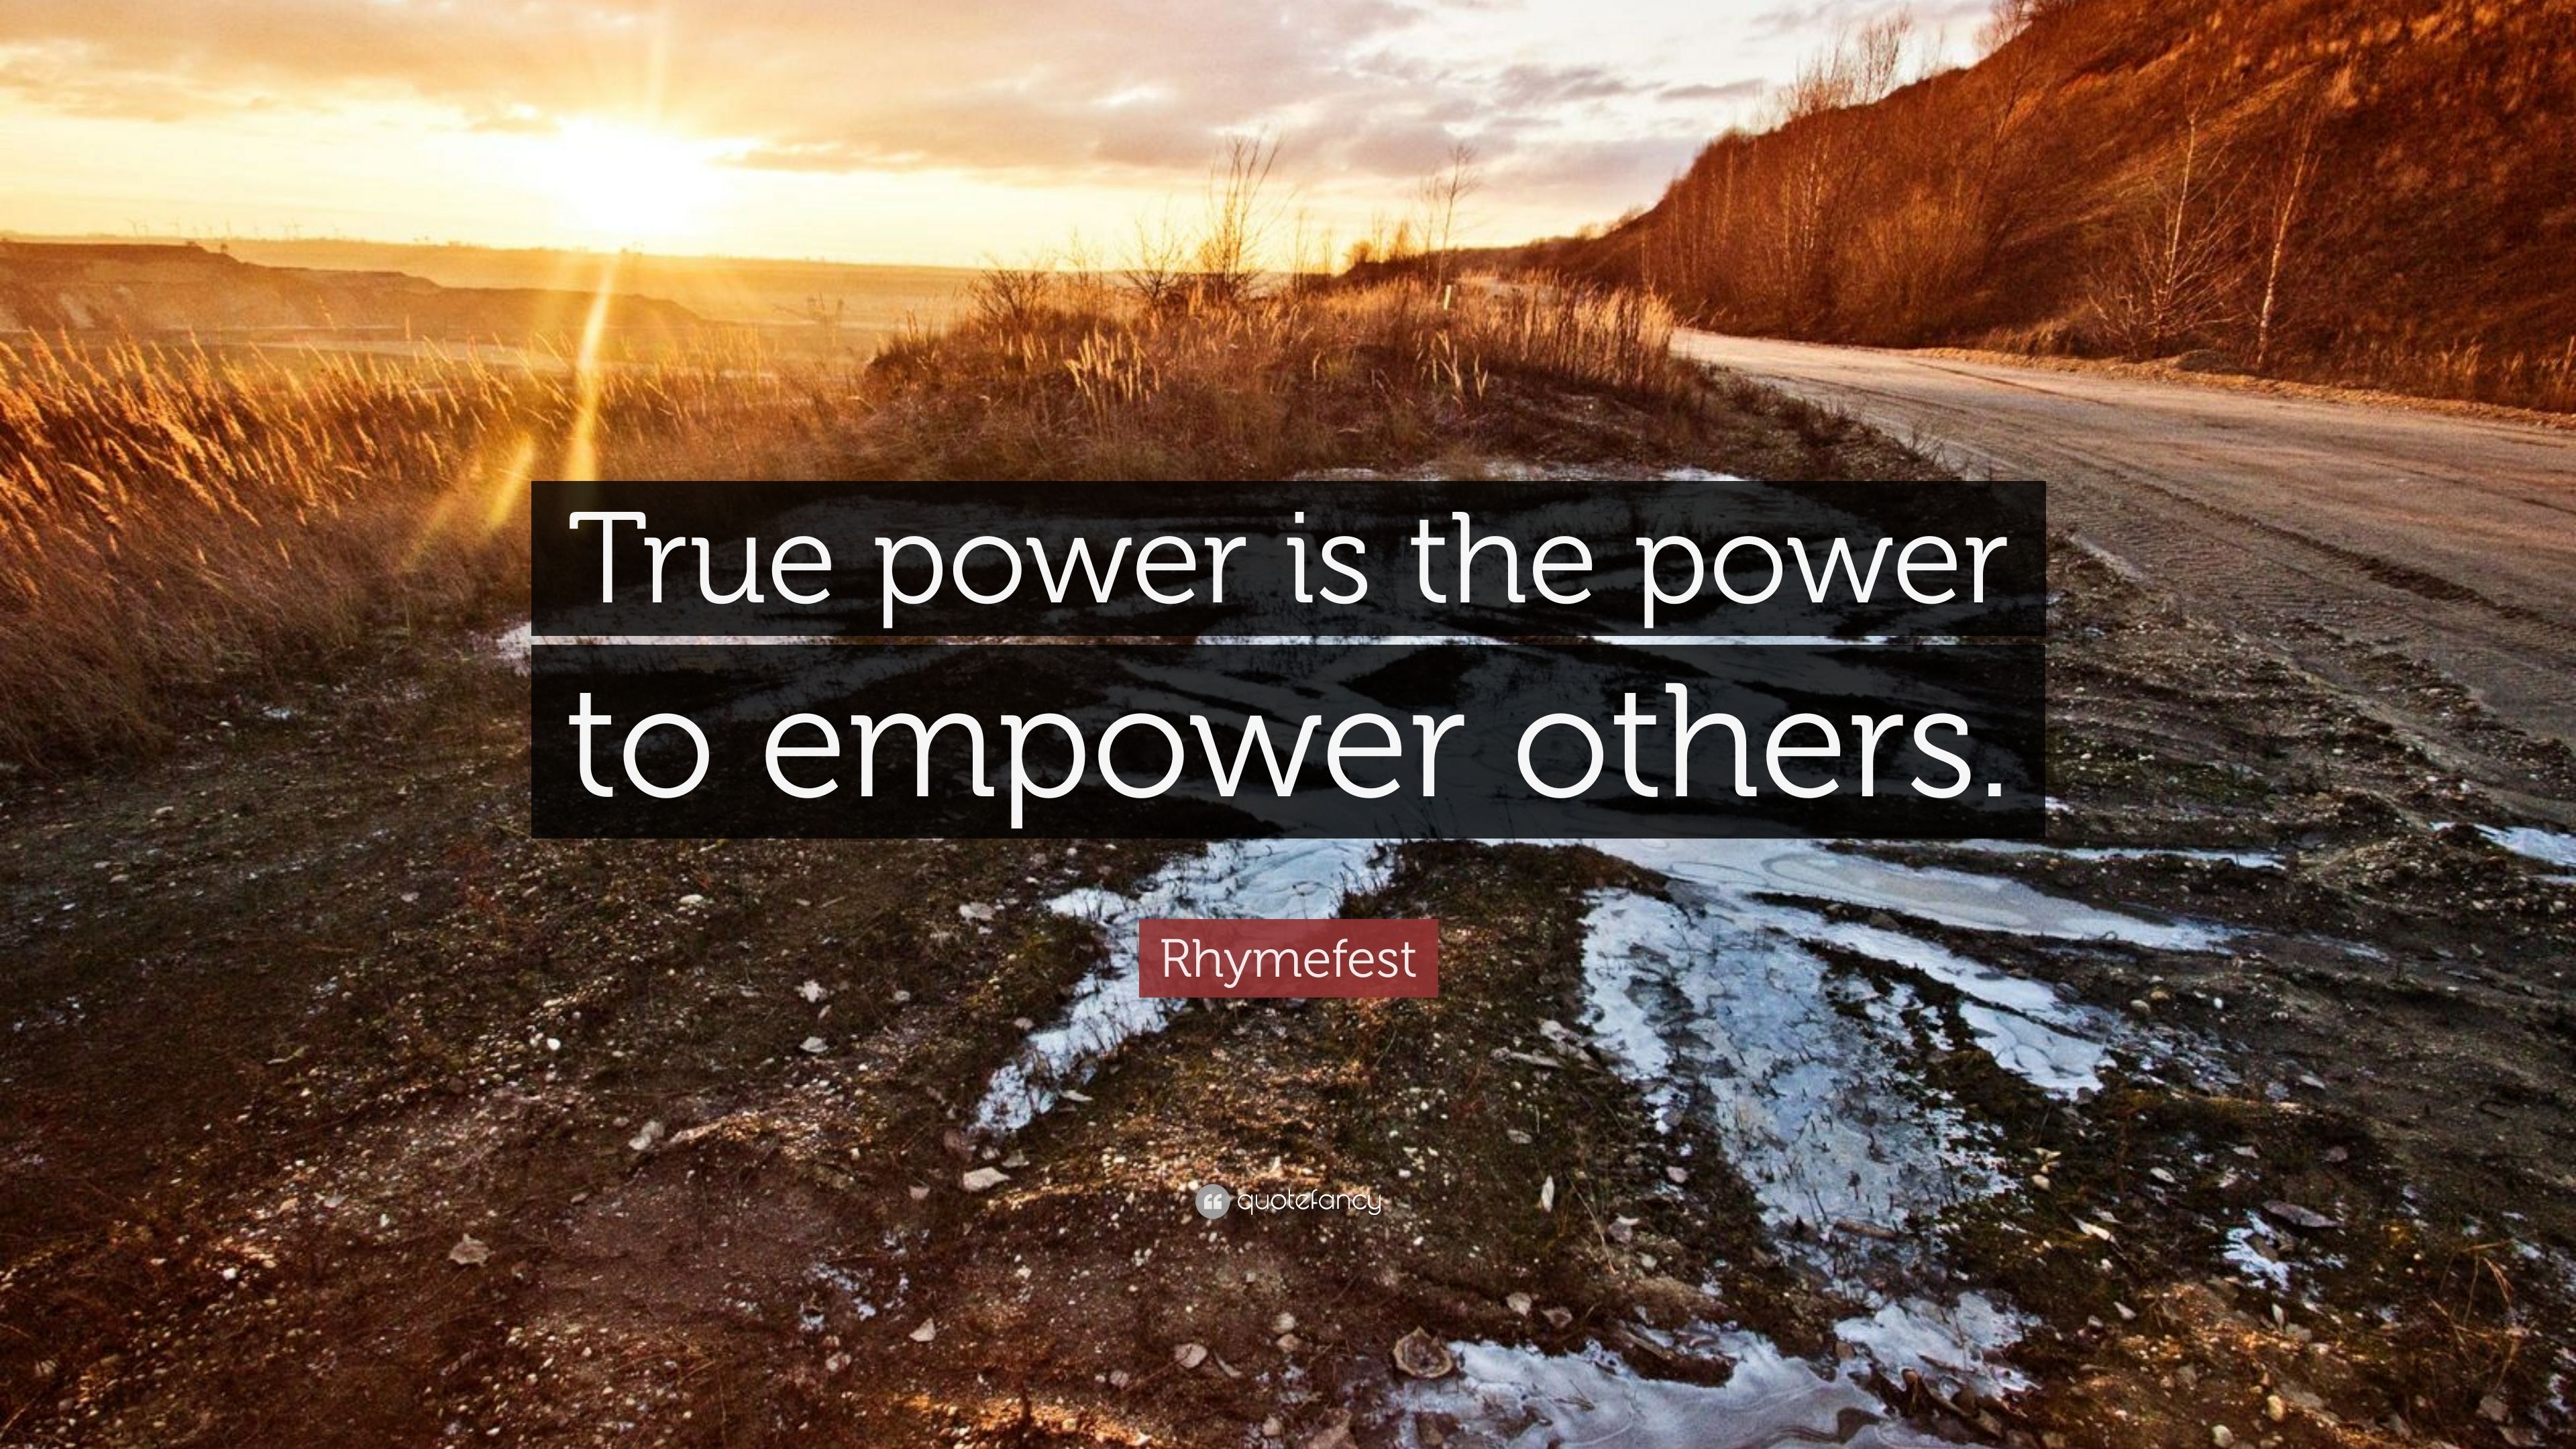 Rhymefest Quote: “True power is the power to empower others.” 7